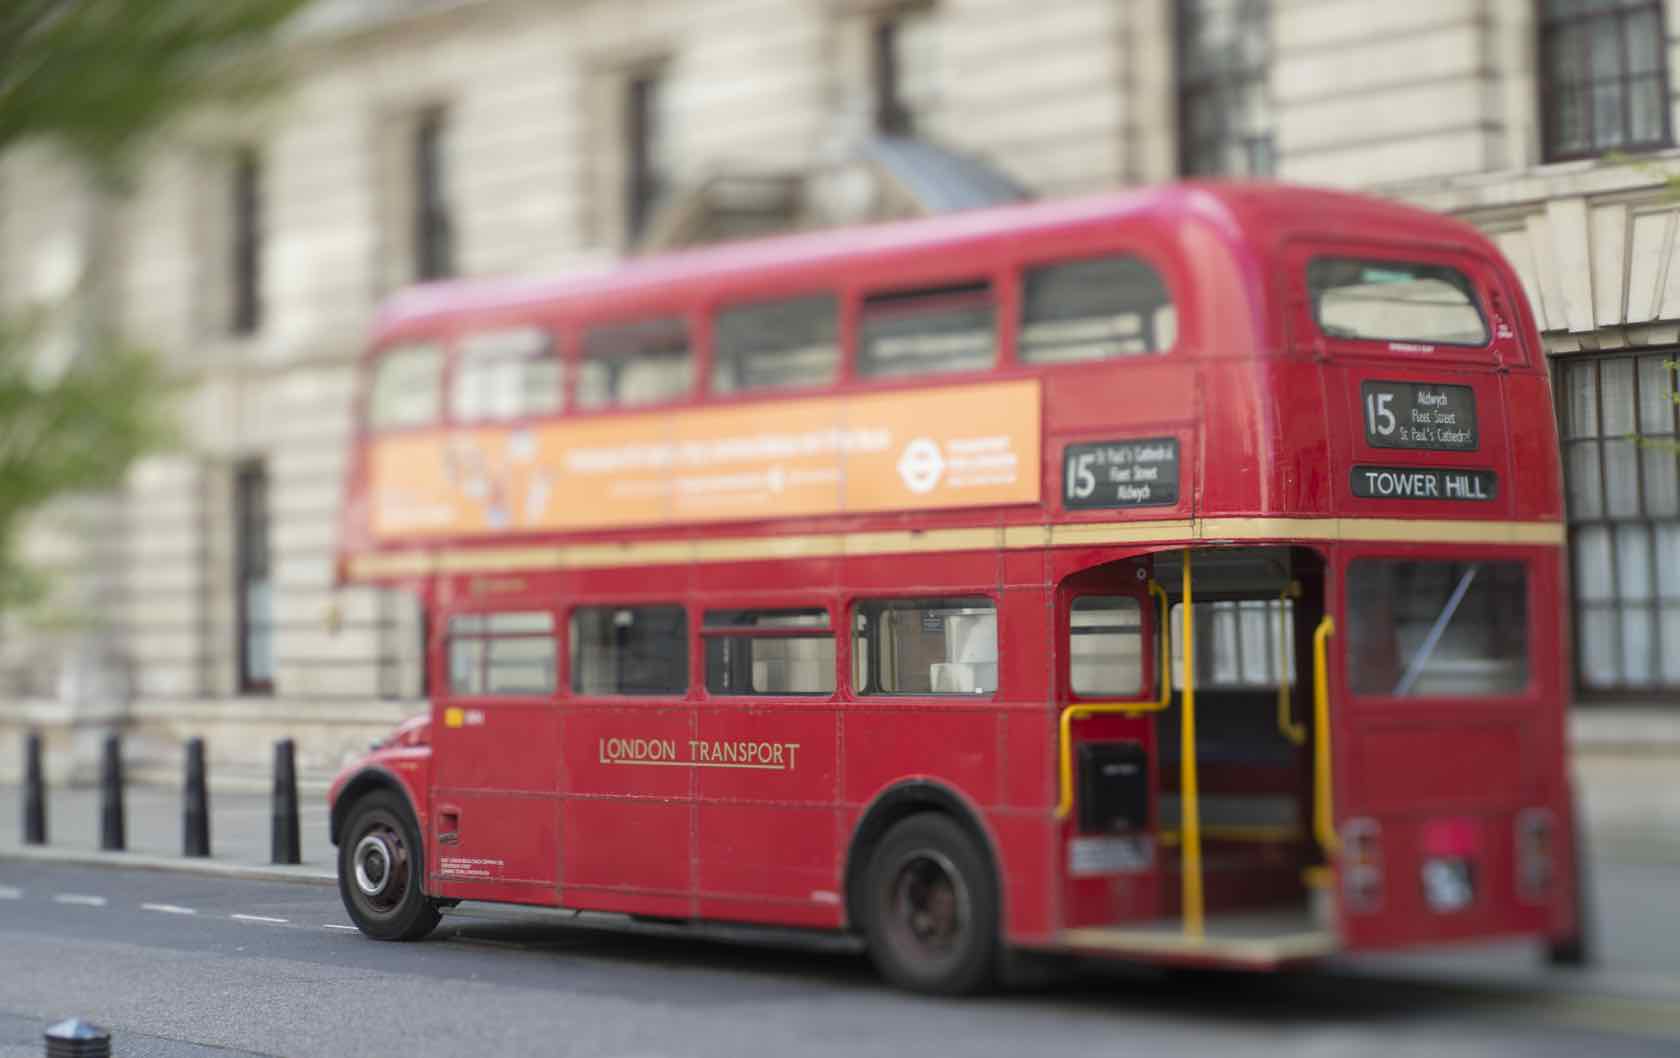 Top 5 Travel Tips to Get Around London